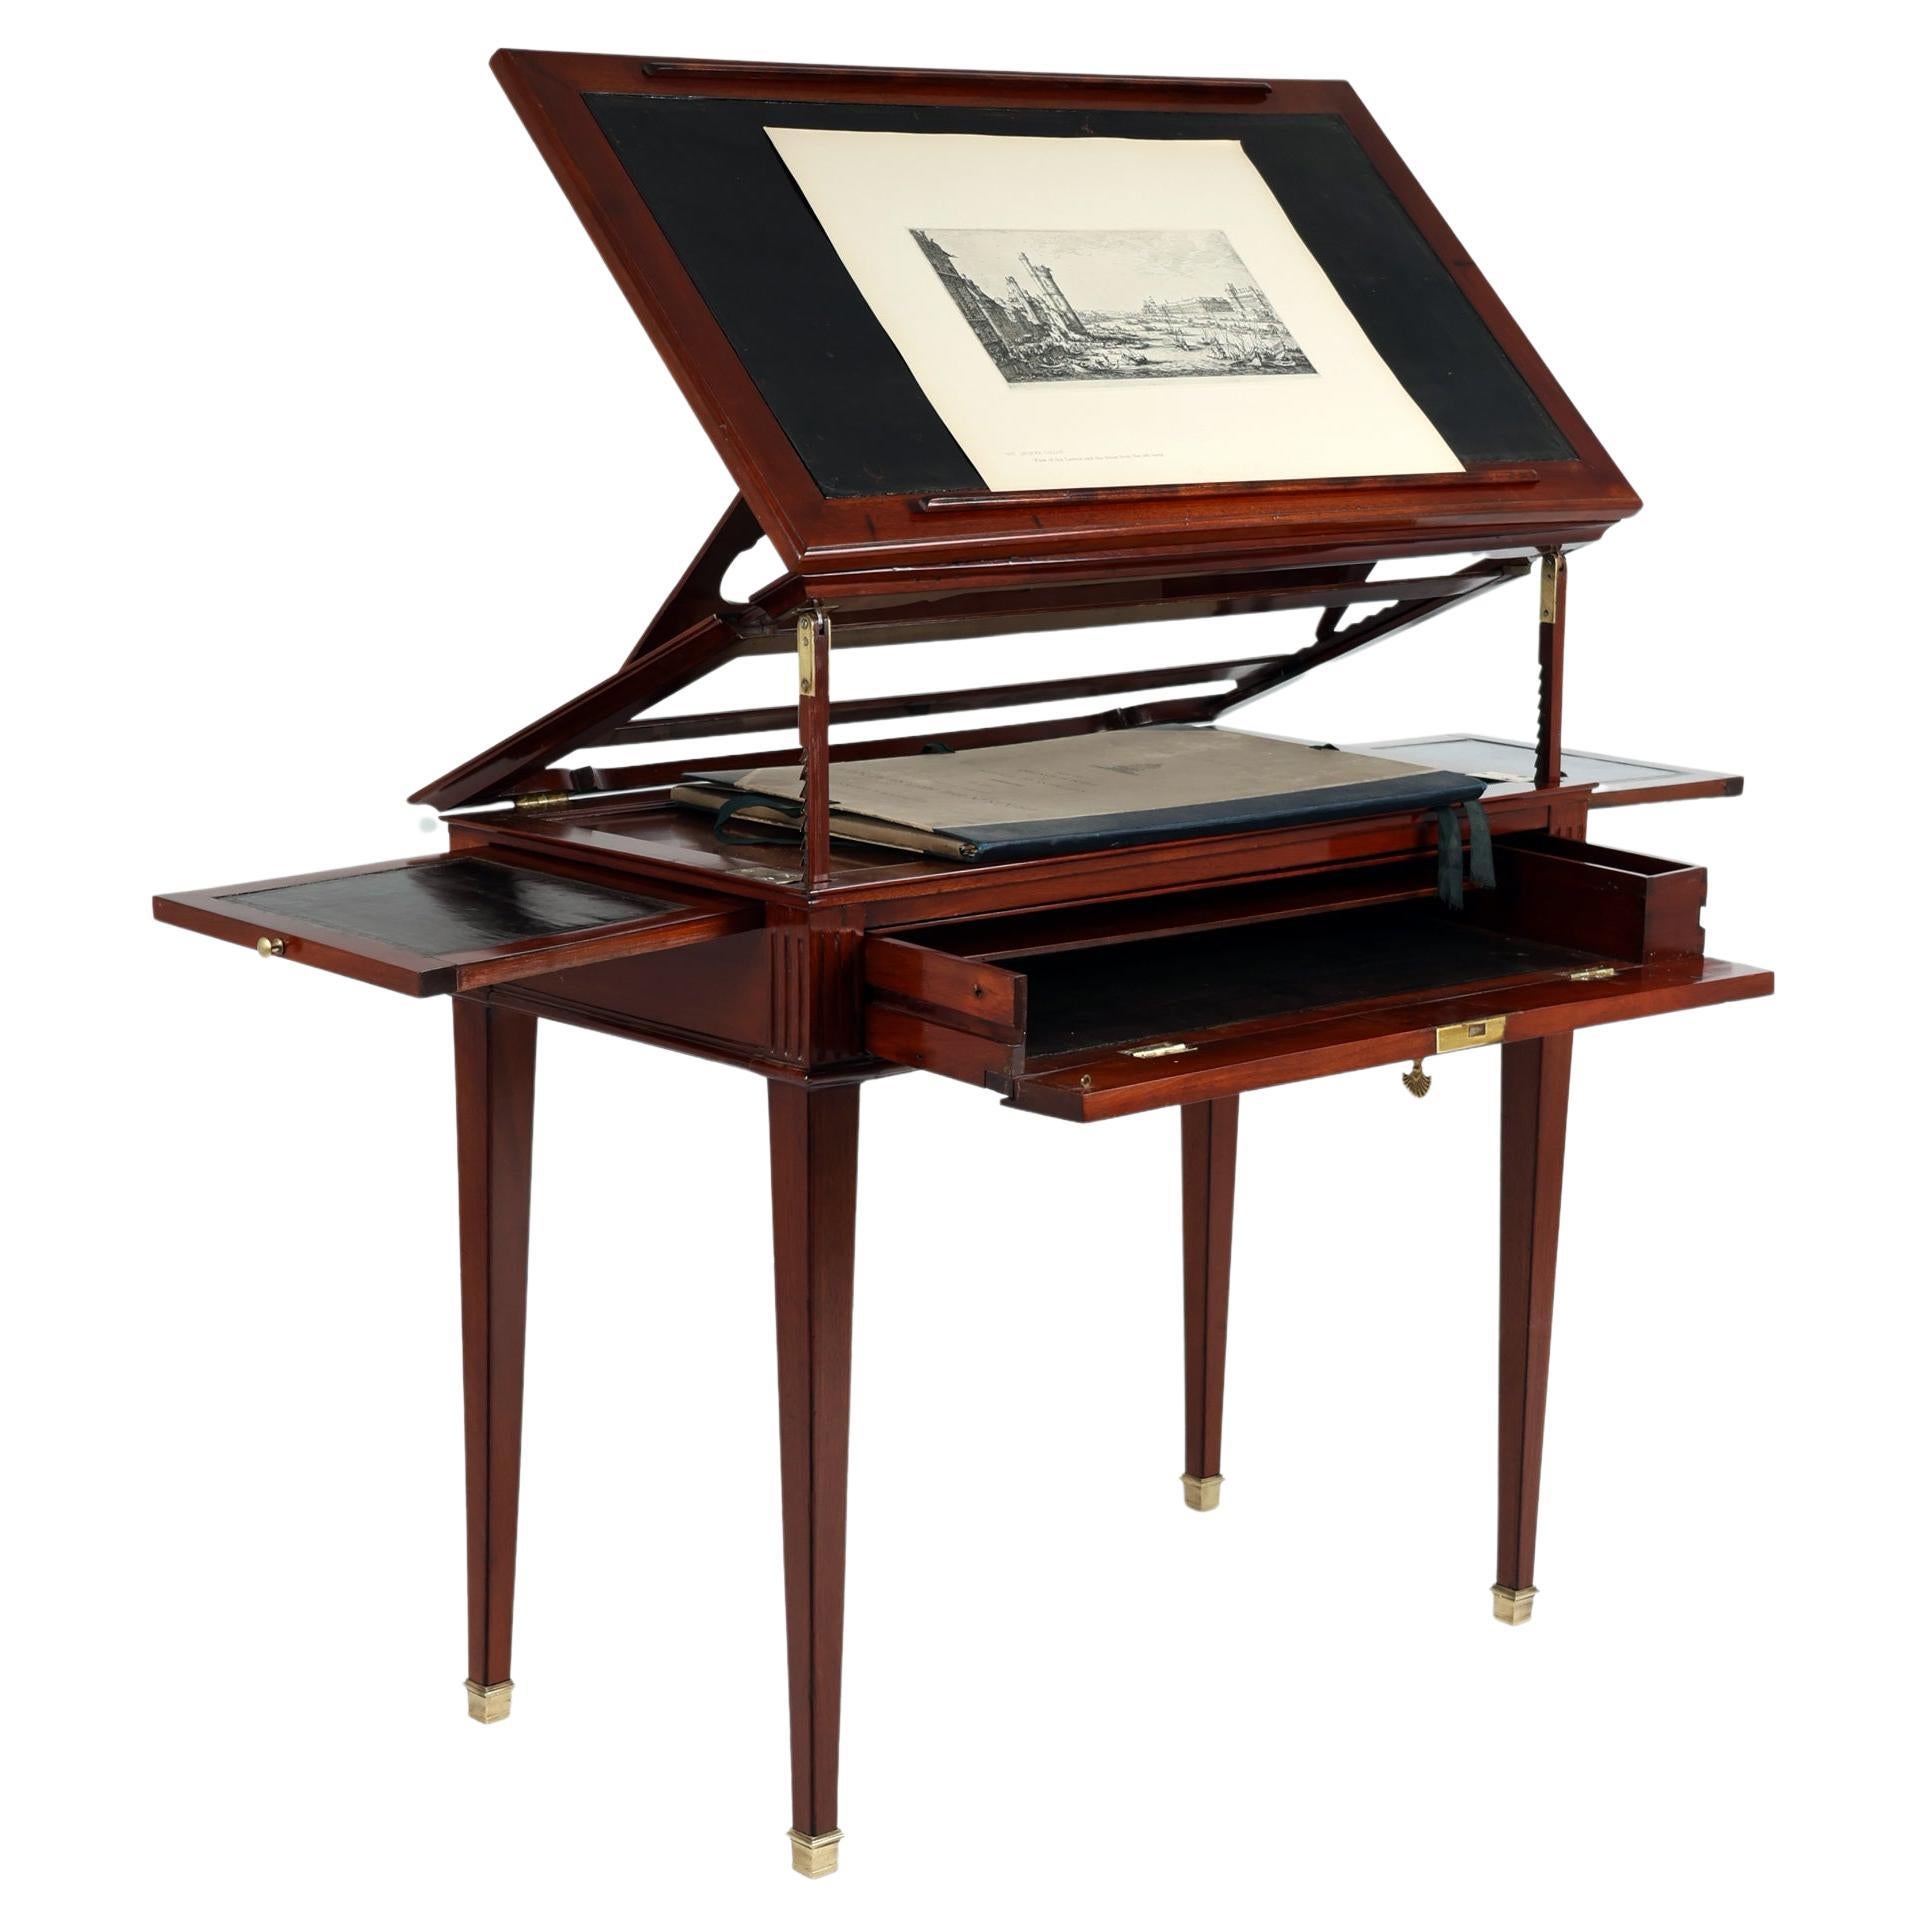 1790s Desks and Writing Tables